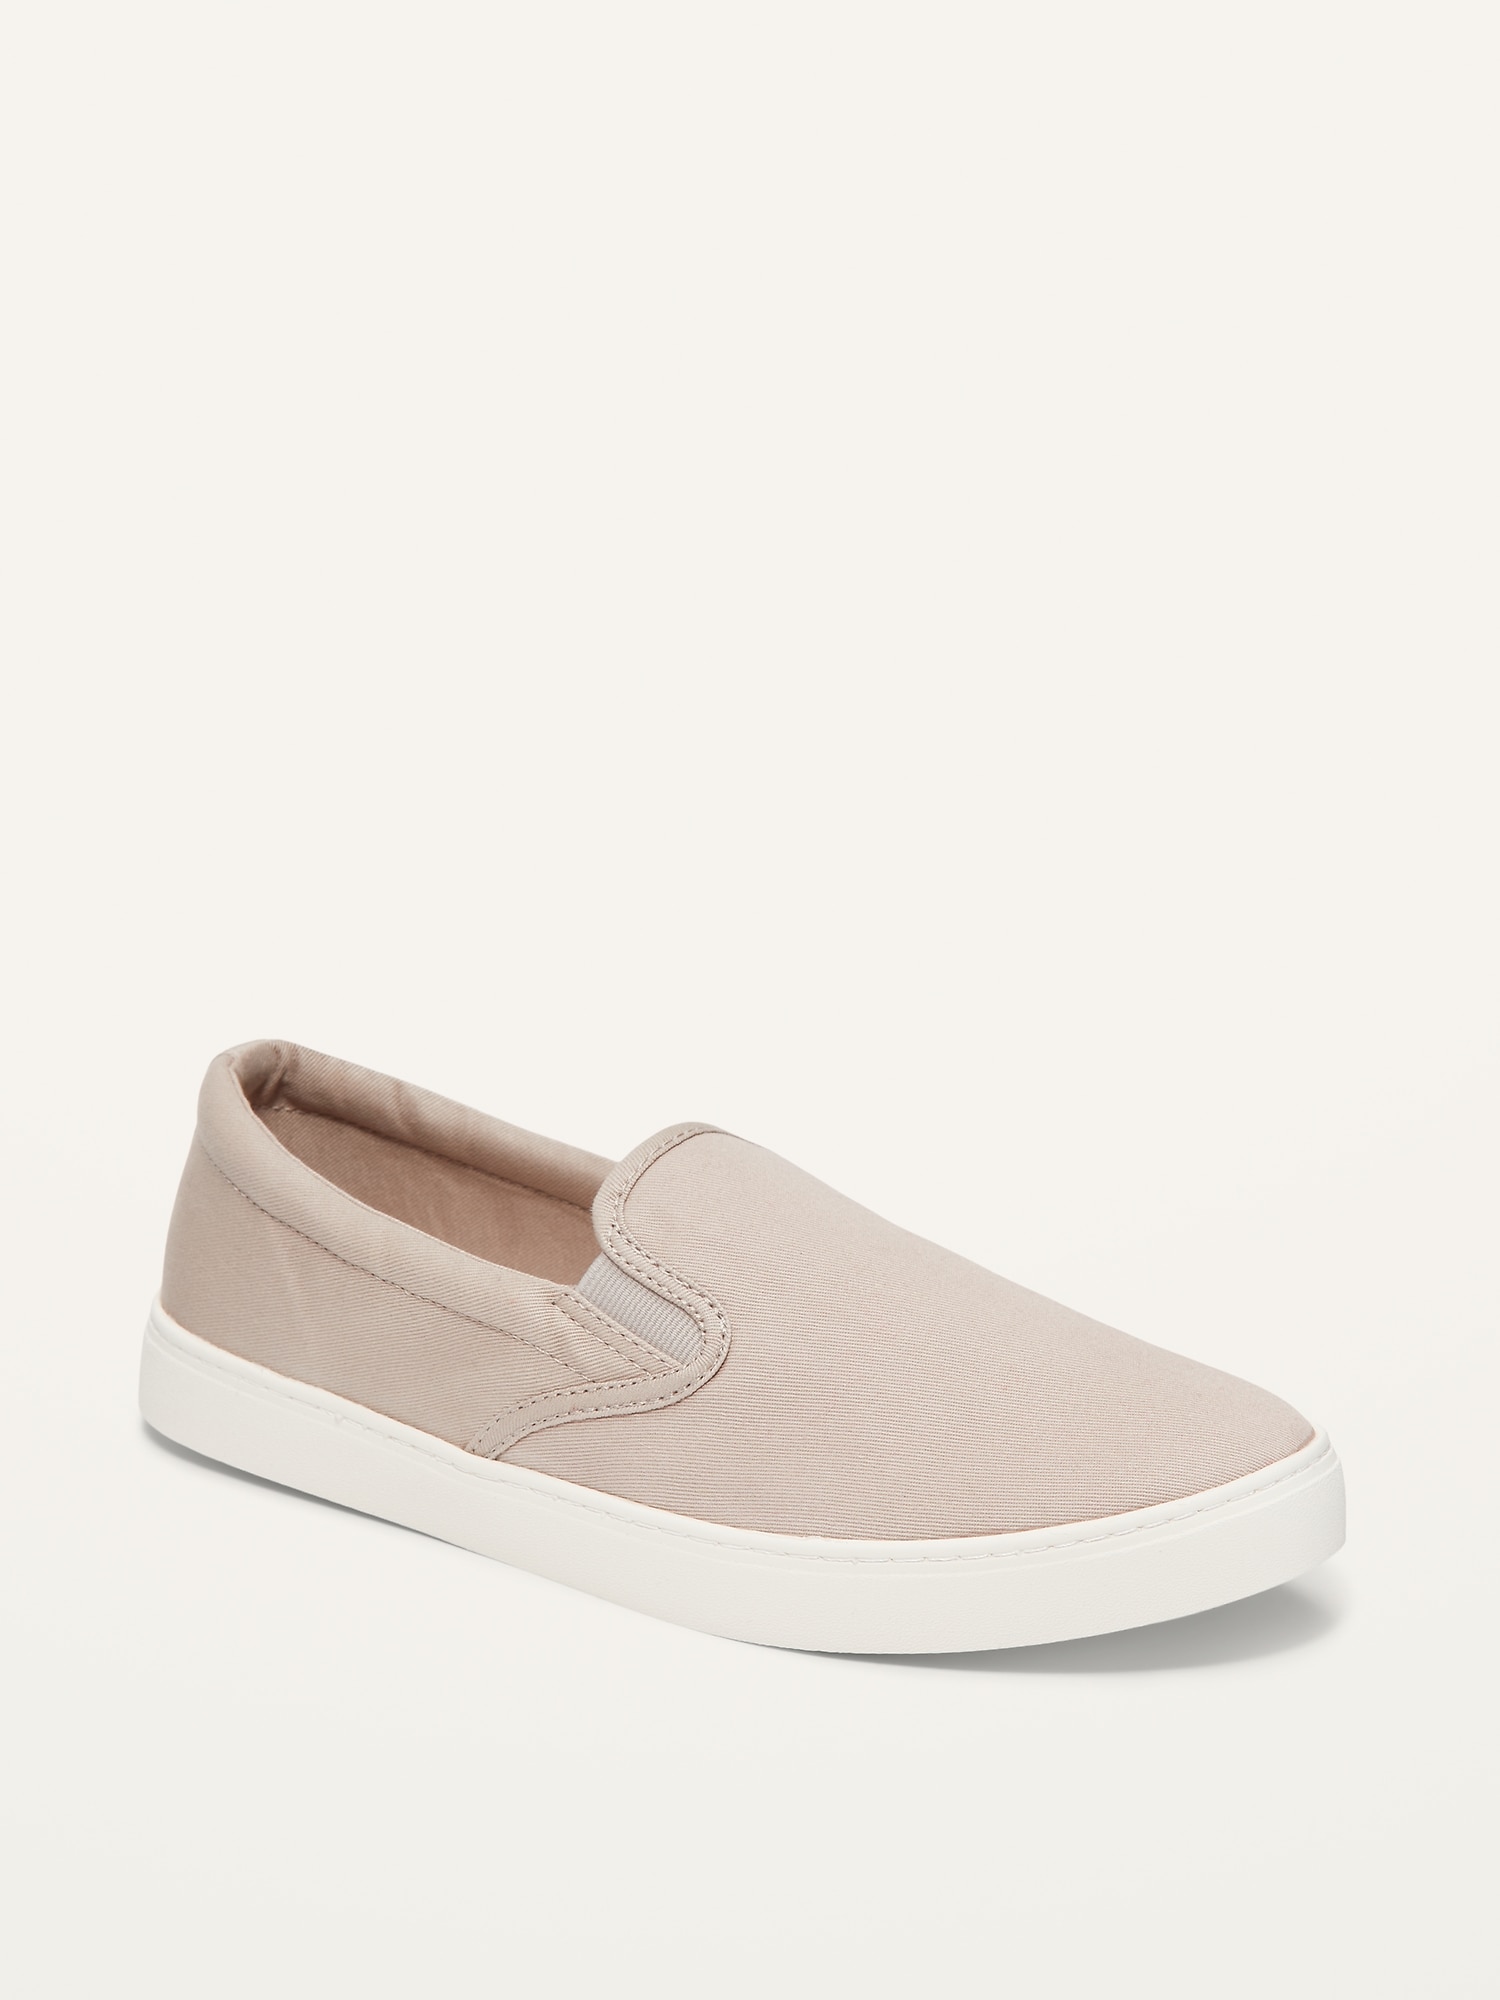 Canvas Slip-On Sneakers For Women | Old Navy